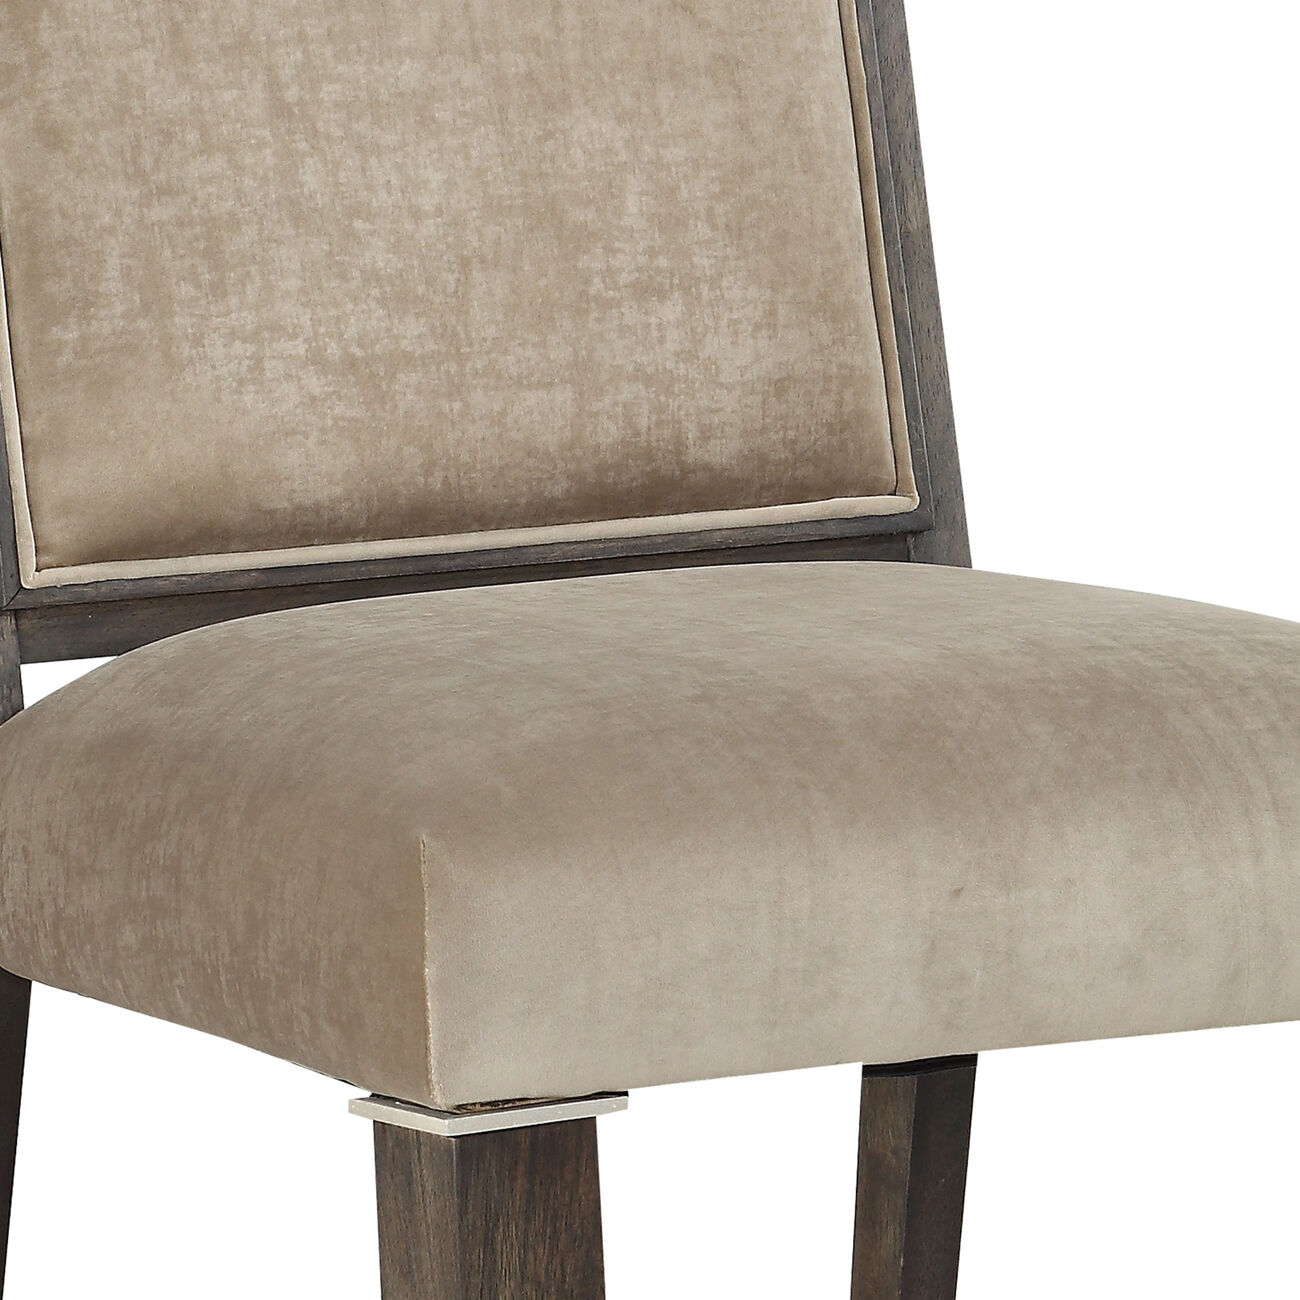 Wood and Fabric Upholstered Dining Chair, Set of 2, Brown and Beige